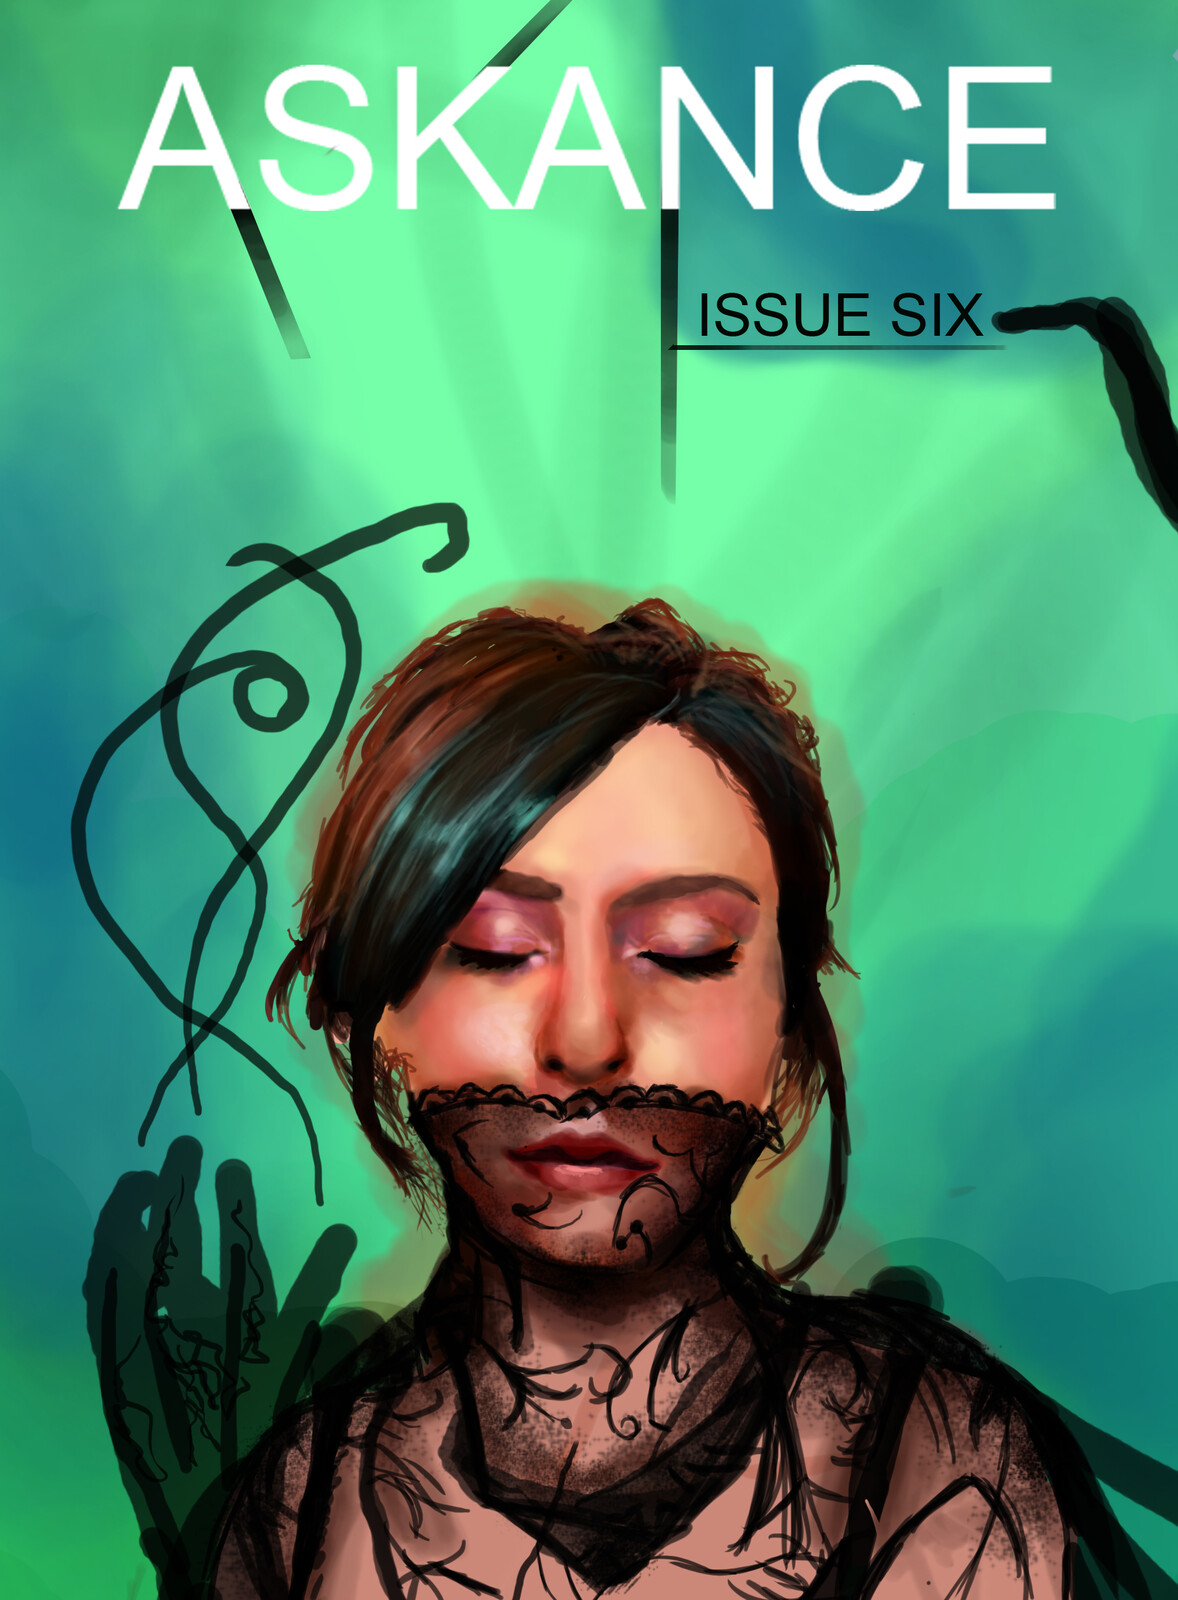 Askance Issue Six Cover